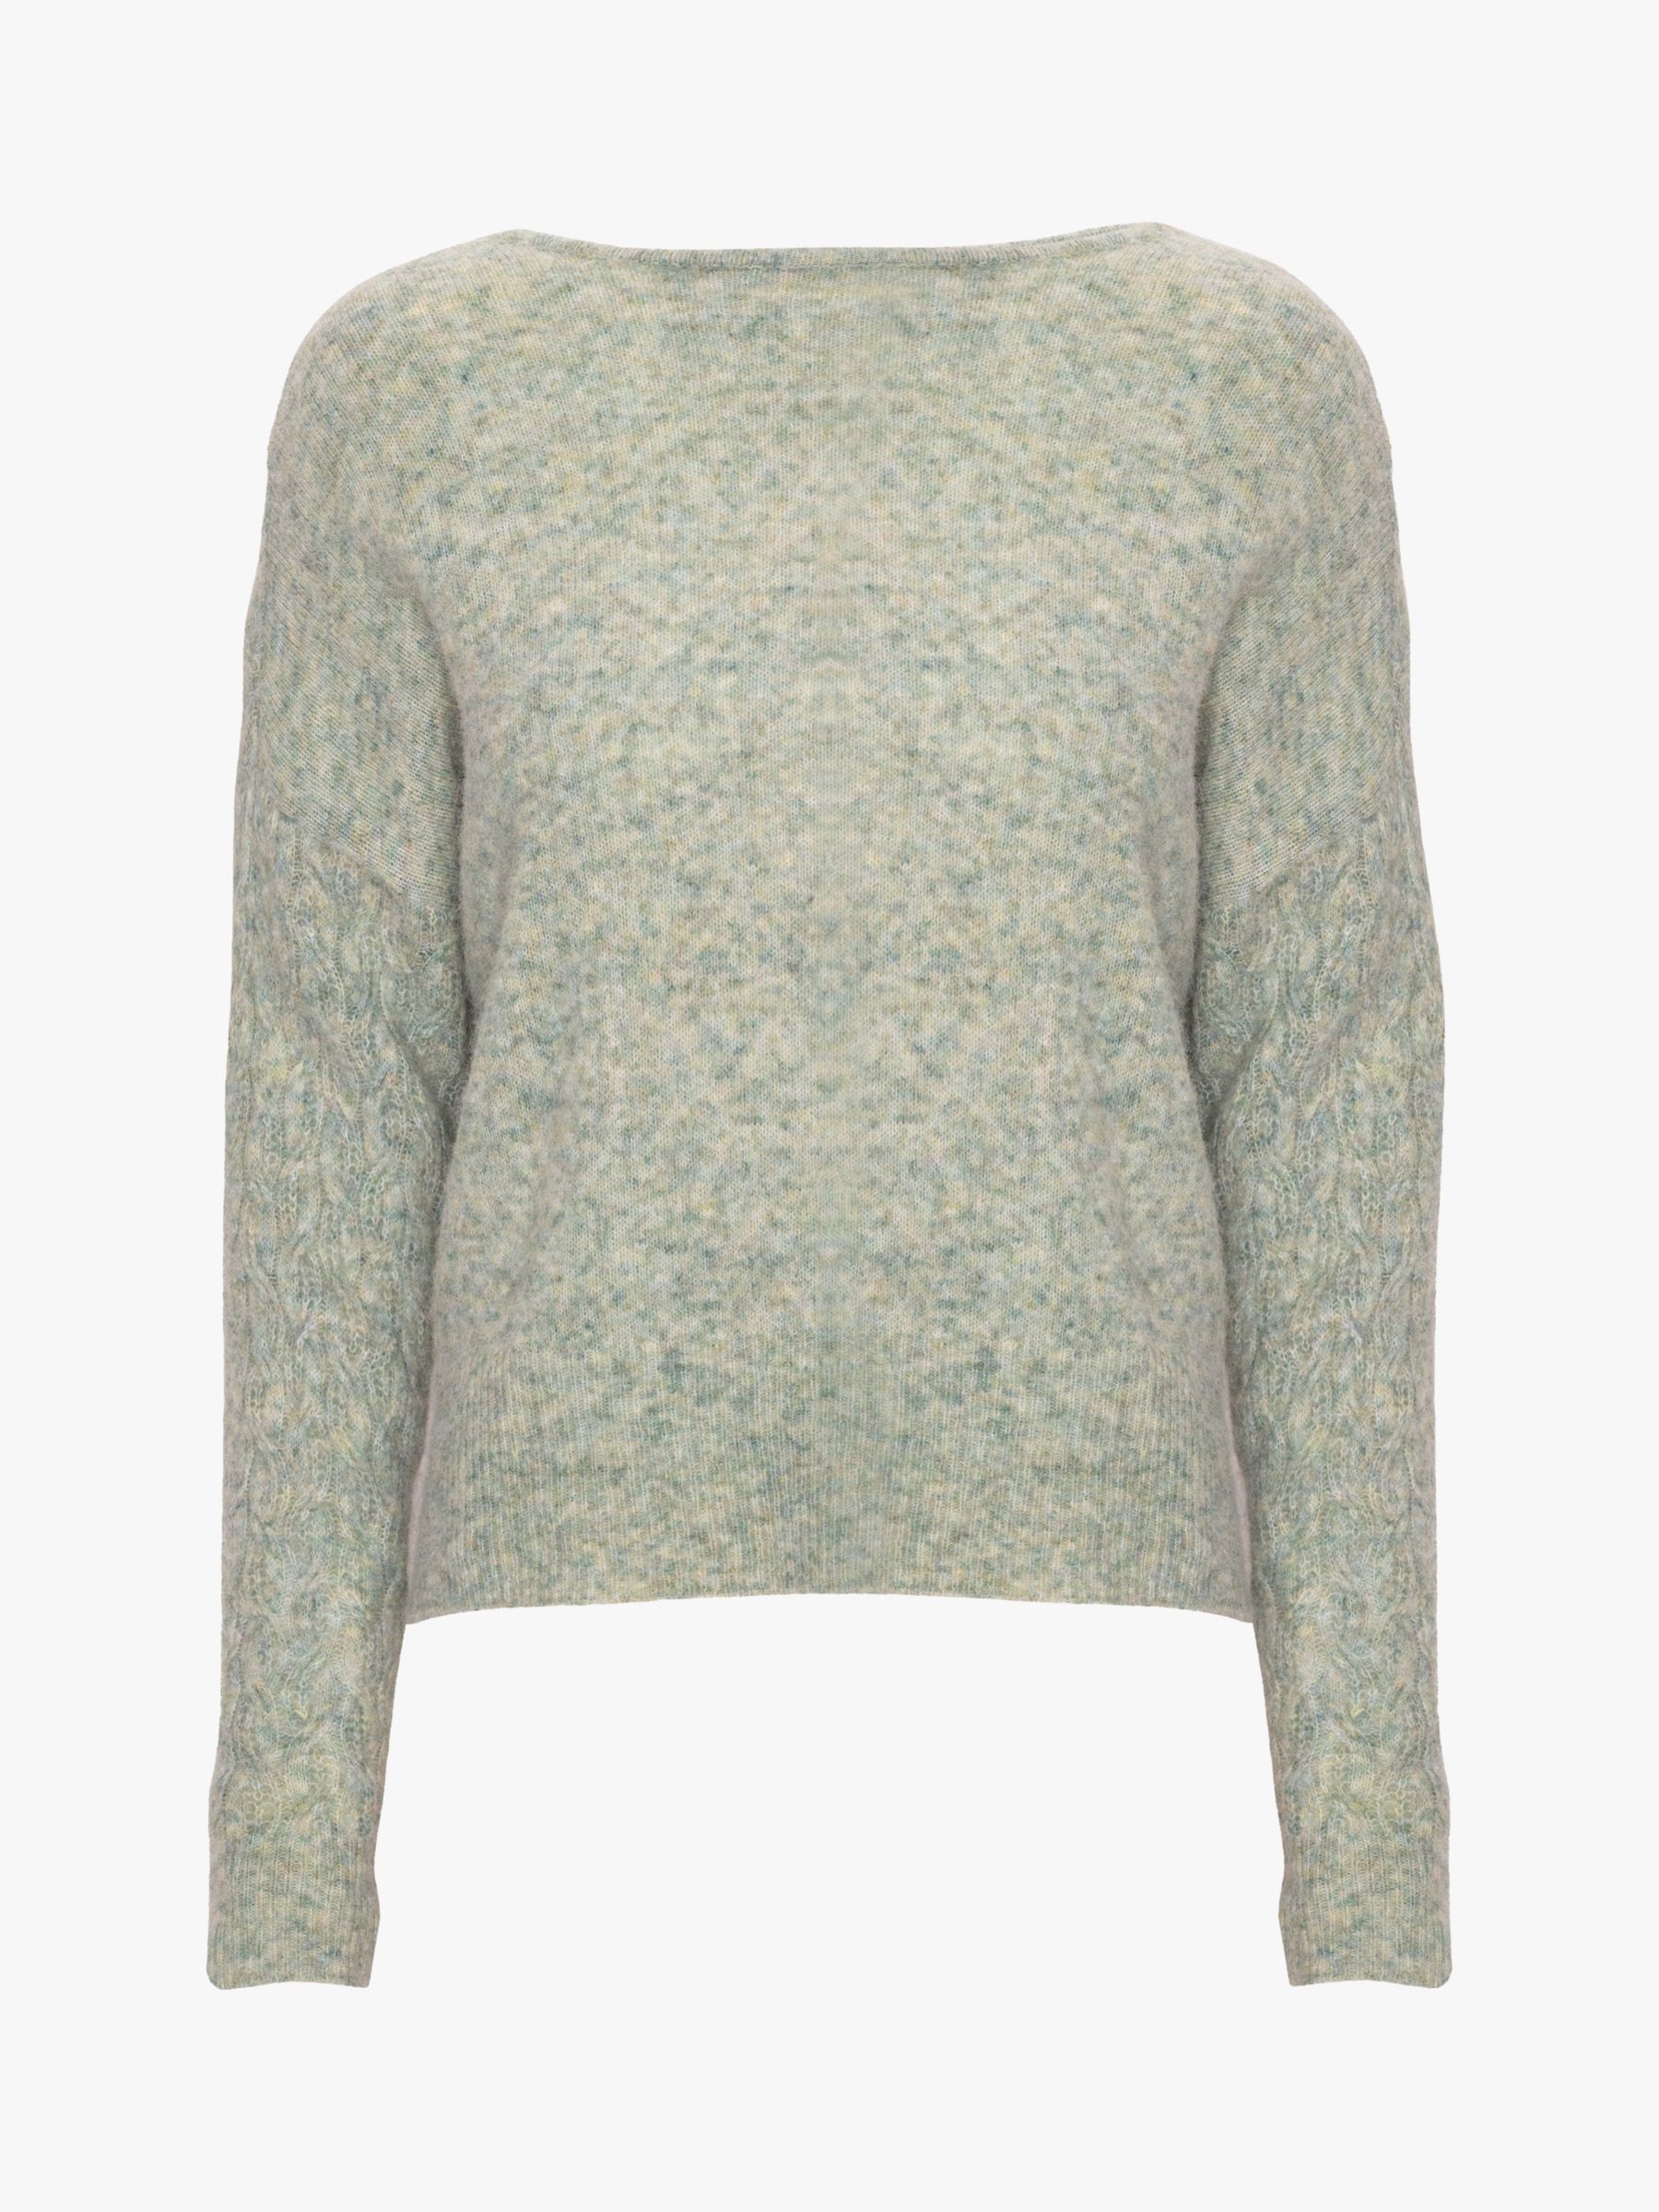 A-VIEW Filippa Knitted Reversible Jumper, Dusty Mint, S